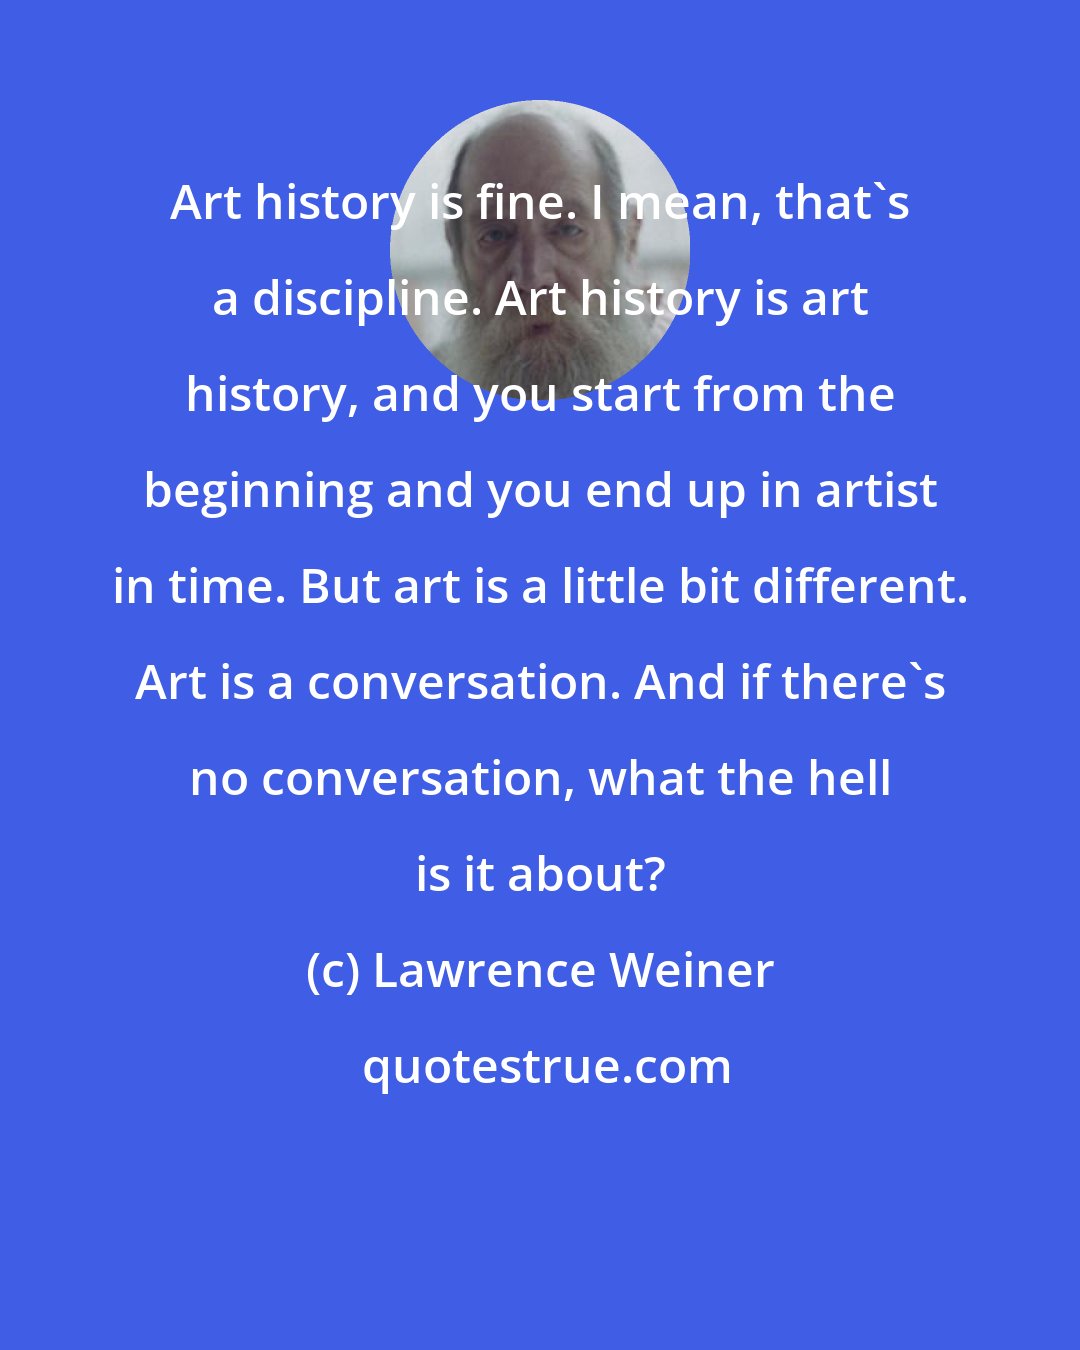 Lawrence Weiner: Art history is fine. I mean, that's a discipline. Art history is art history, and you start from the beginning and you end up in artist in time. But art is a little bit different. Art is a conversation. And if there's no conversation, what the hell is it about?